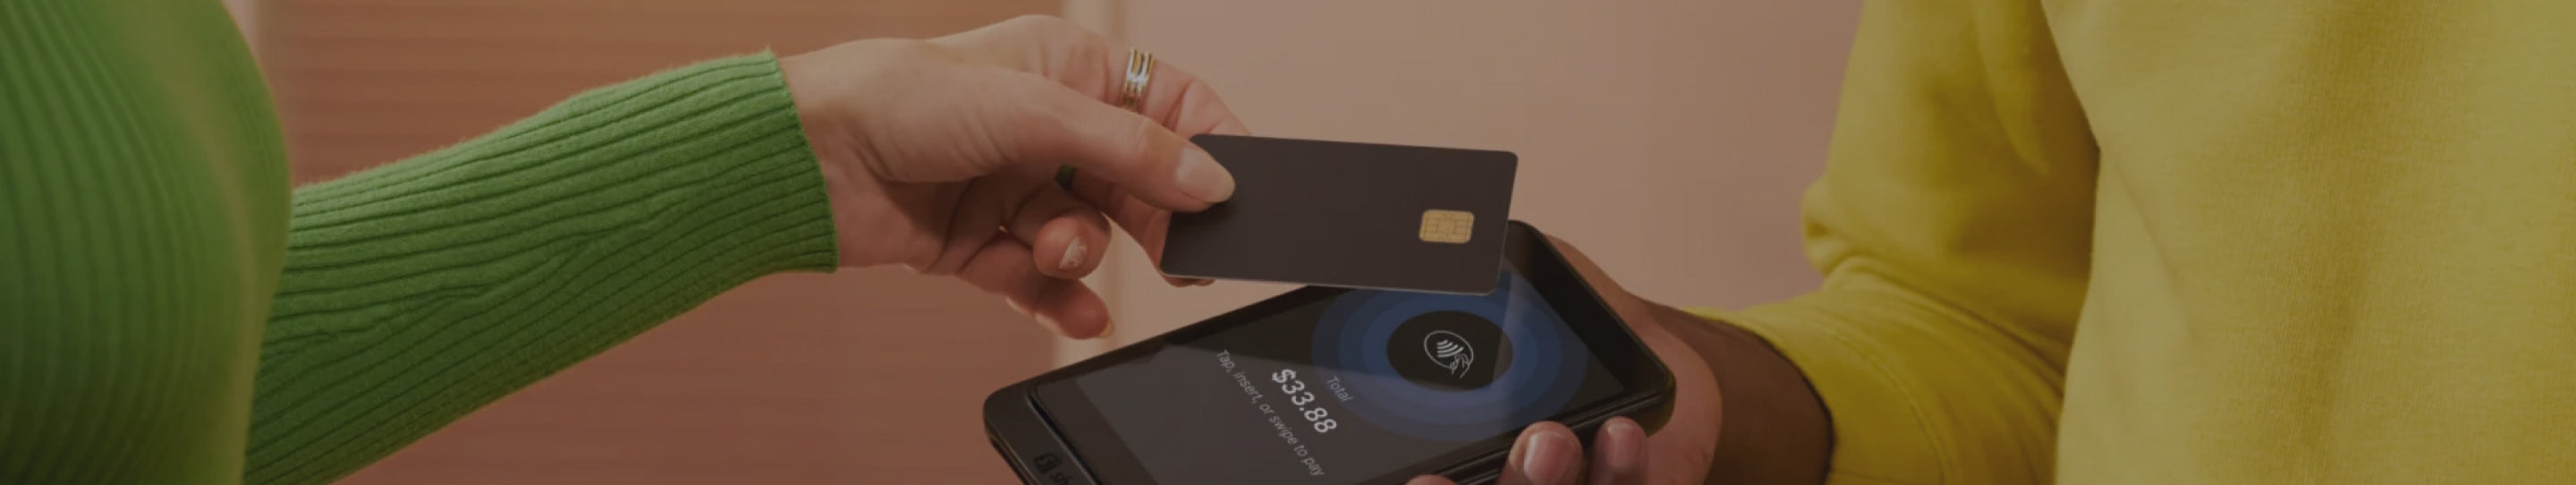 Close-up of a customer's hand holding a black credit card near a Shopify card reader to process a payment, capturing a moment of transaction.